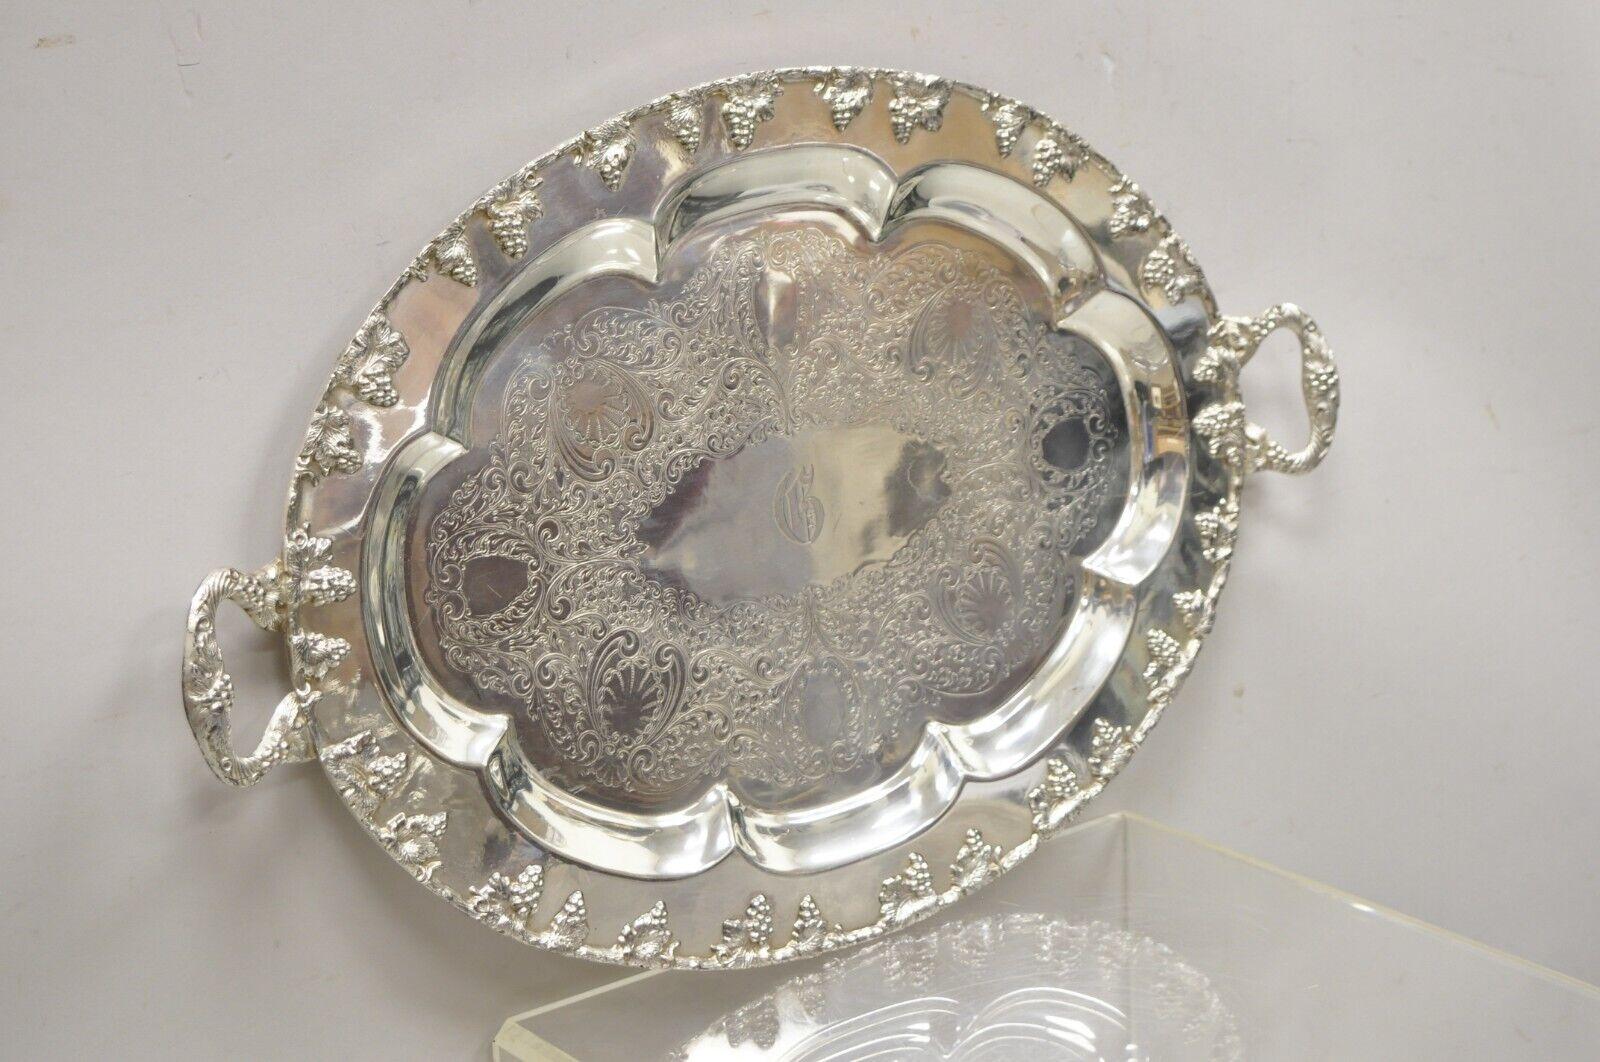 Vintage English Victorian regency silver plate oval grapevine platter tray with monogram. Cet article comporte un monogramme 